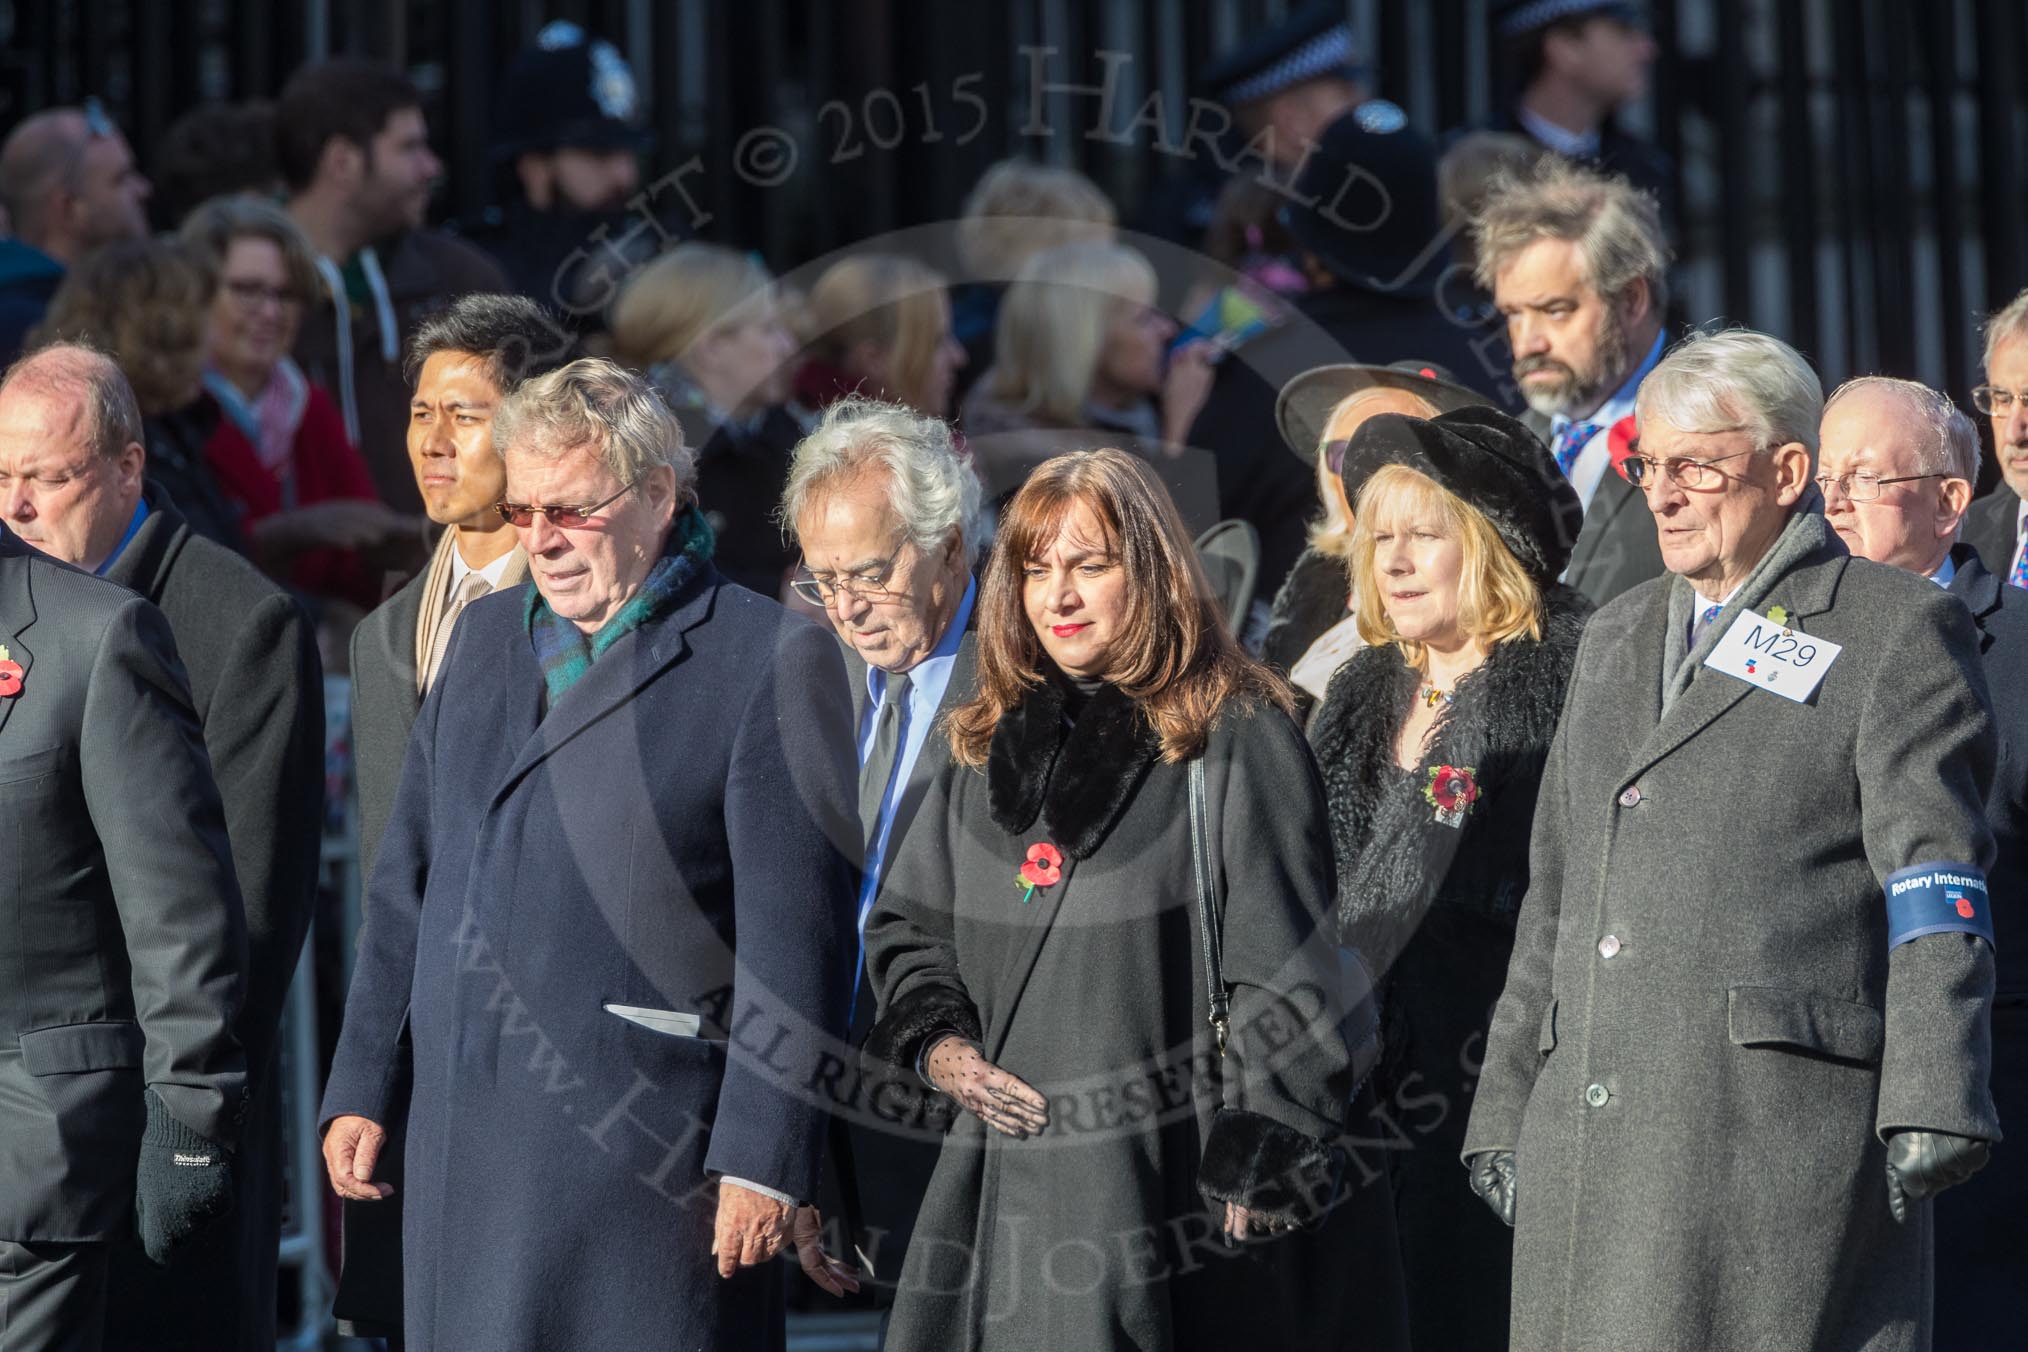 March Past, Remembrance Sunday at the Cenotaph 2016: M29 Rotary International.
Cenotaph, Whitehall, London SW1,
London,
Greater London,
United Kingdom,
on 13 November 2016 at 13:17, image #2753